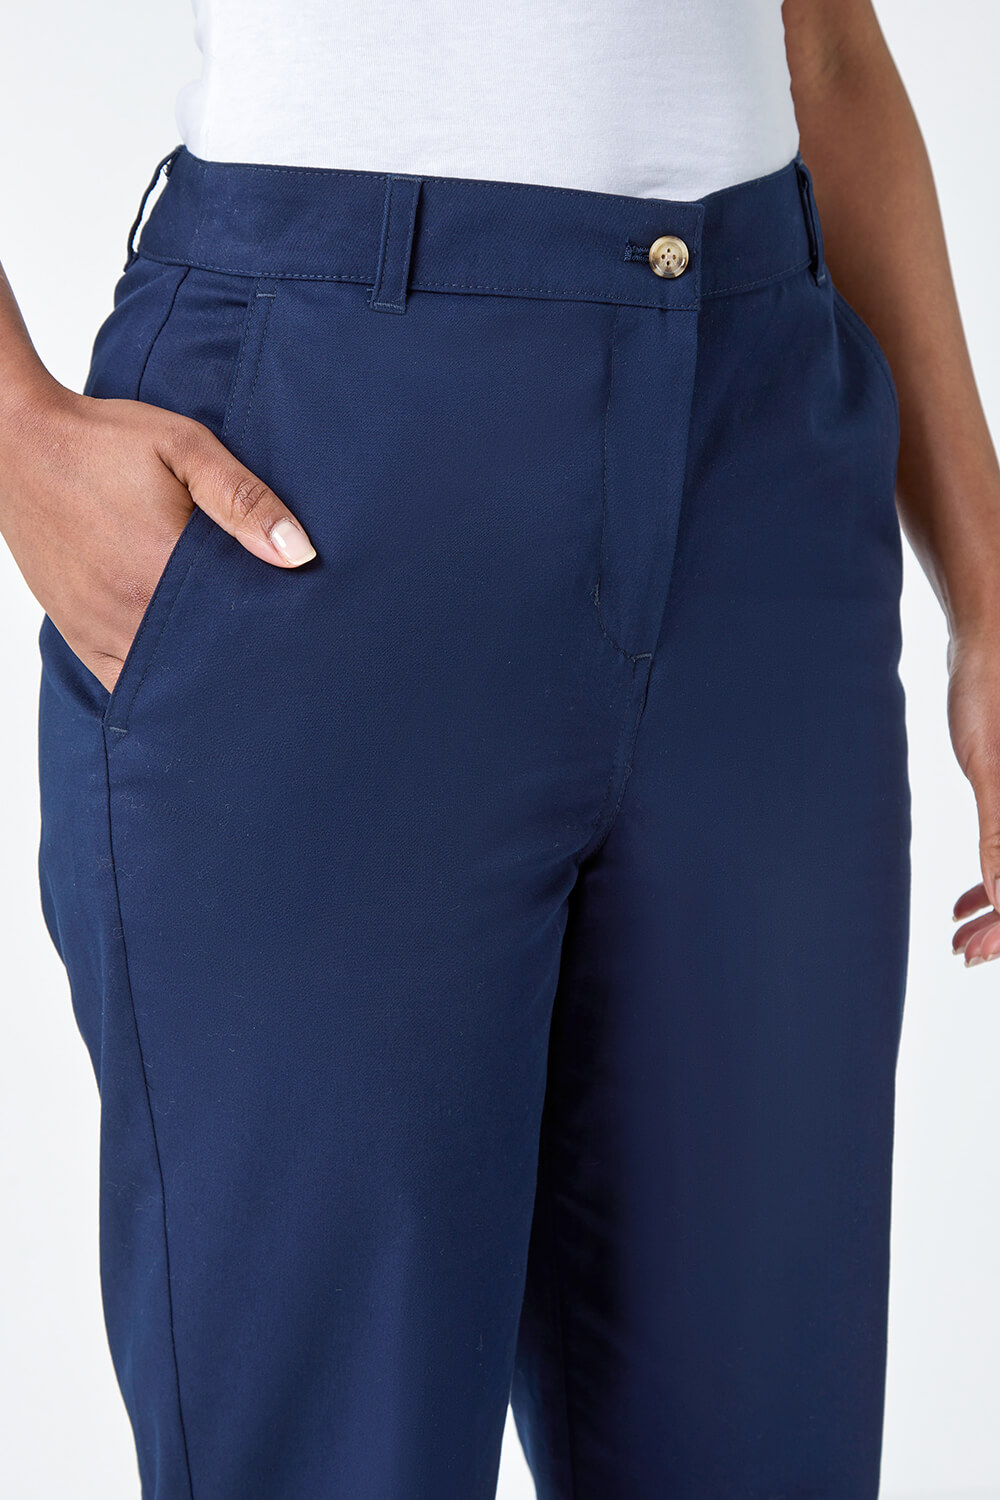 Navy  Petite Cotton Blend Stretch Chino Trousers, Image 5 of 5